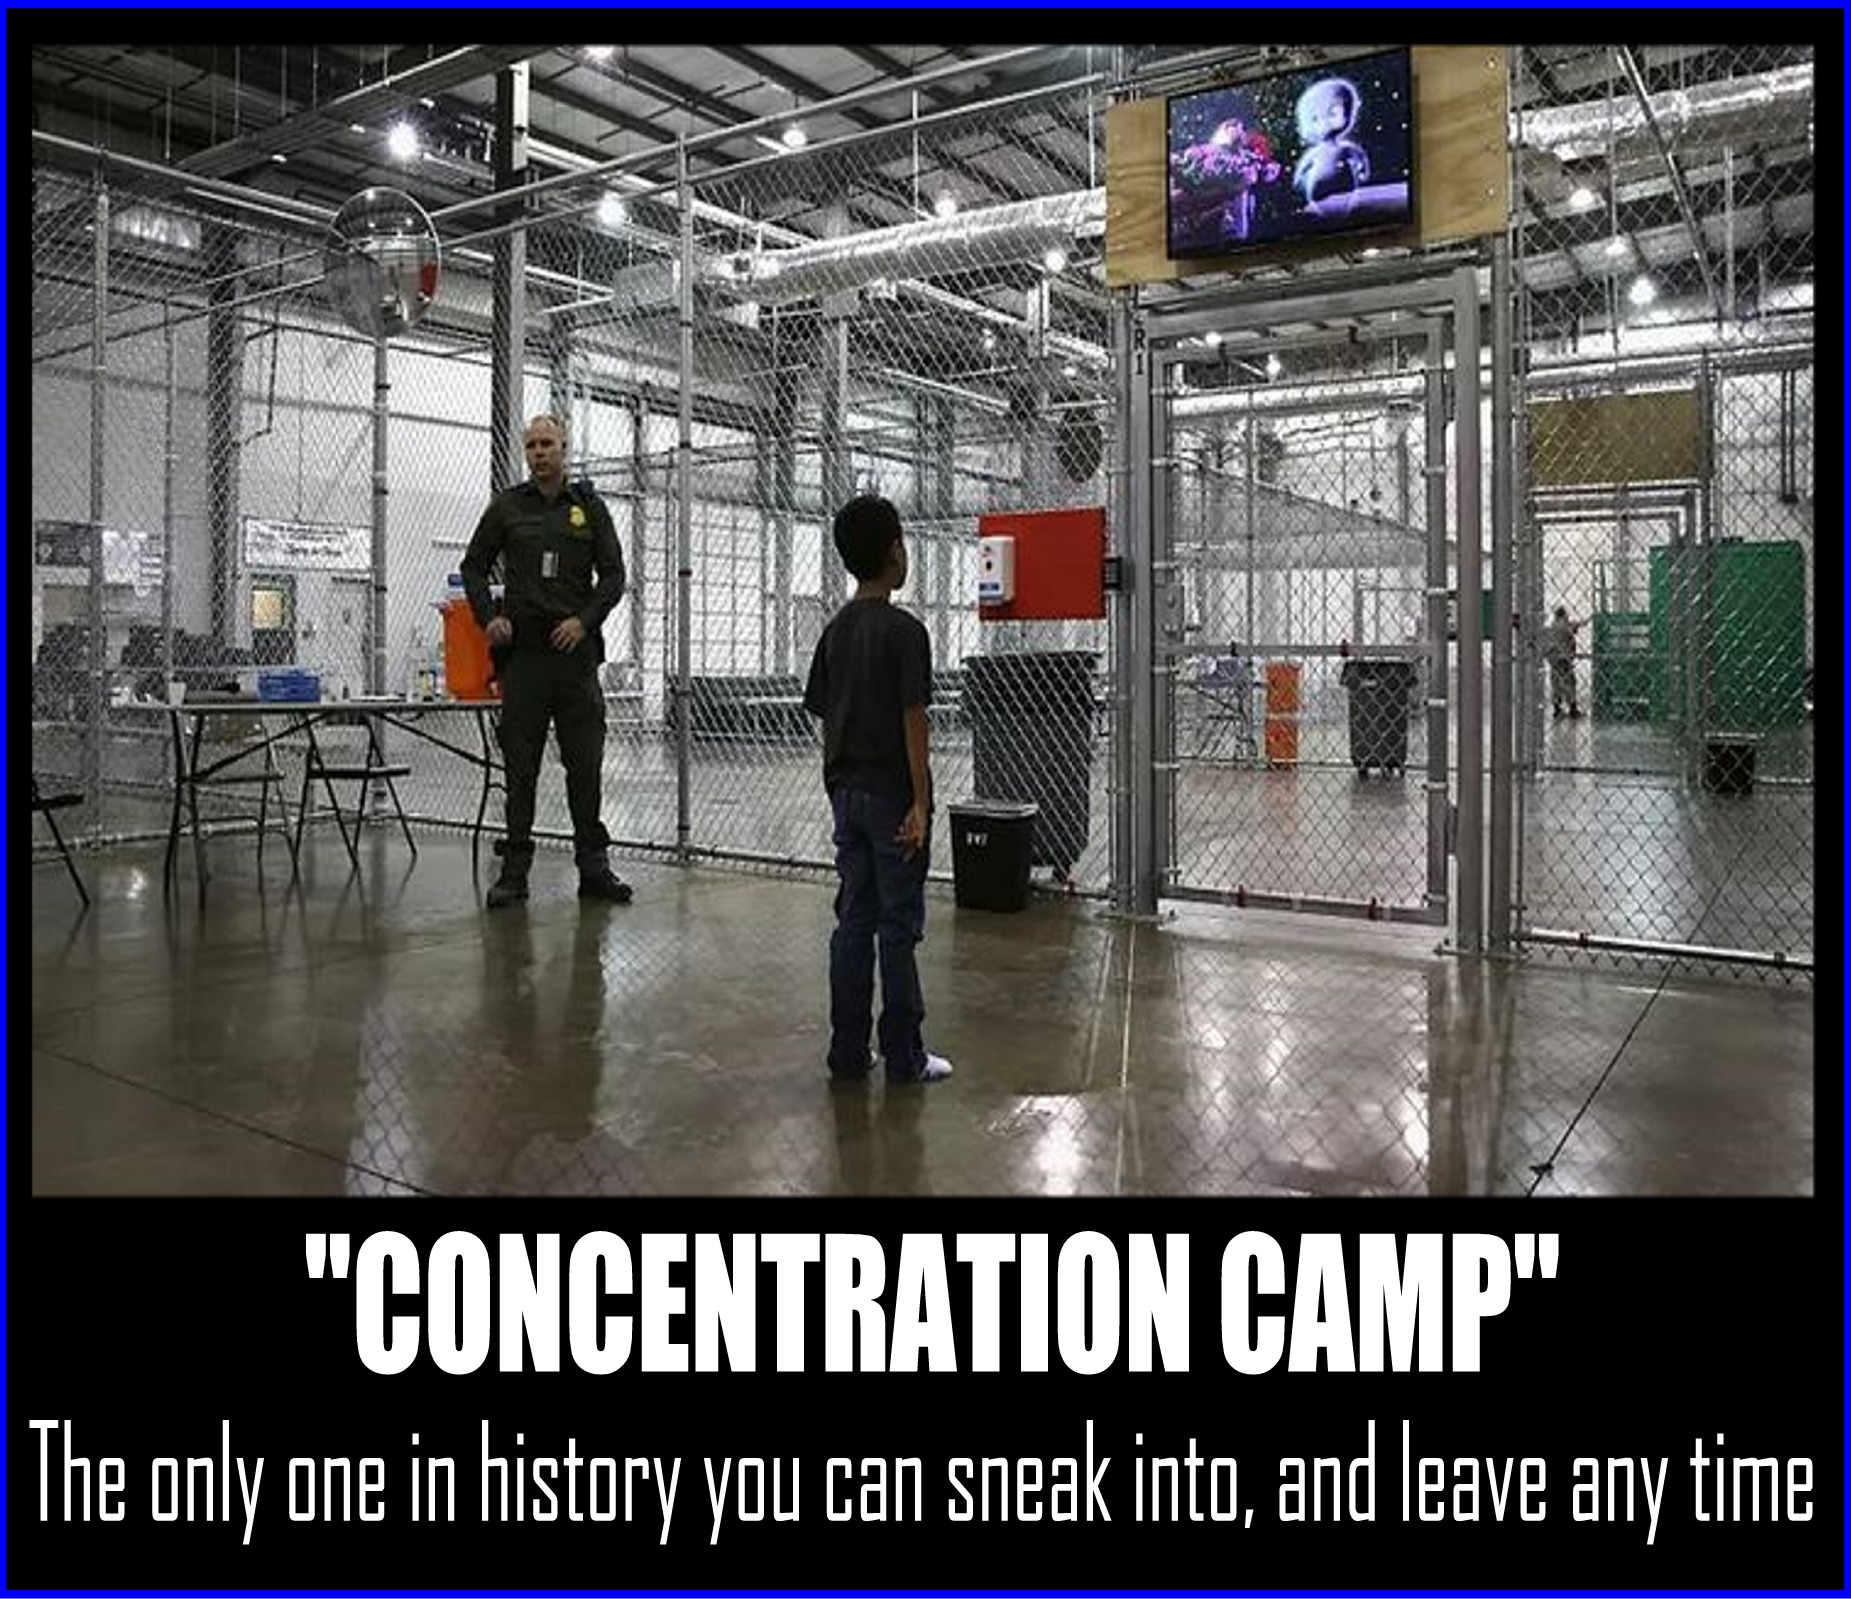 immigrant children us - "Concentration Camp" The only one in history you can sneak into, and leave any time